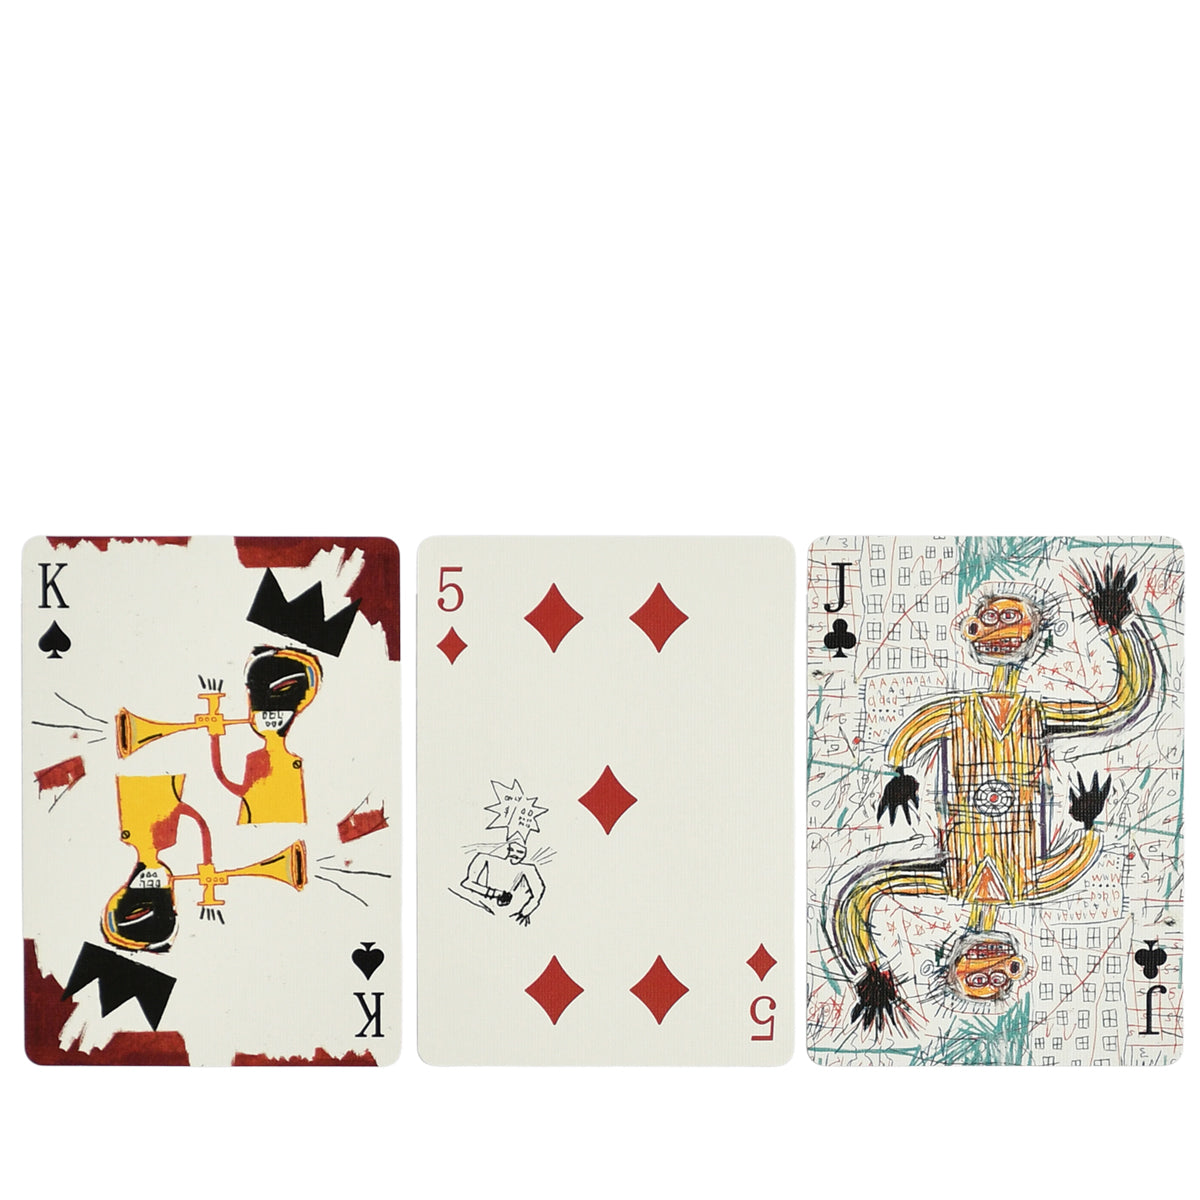 THEORY 11 - PLAYING CARDS - BASQUIAT